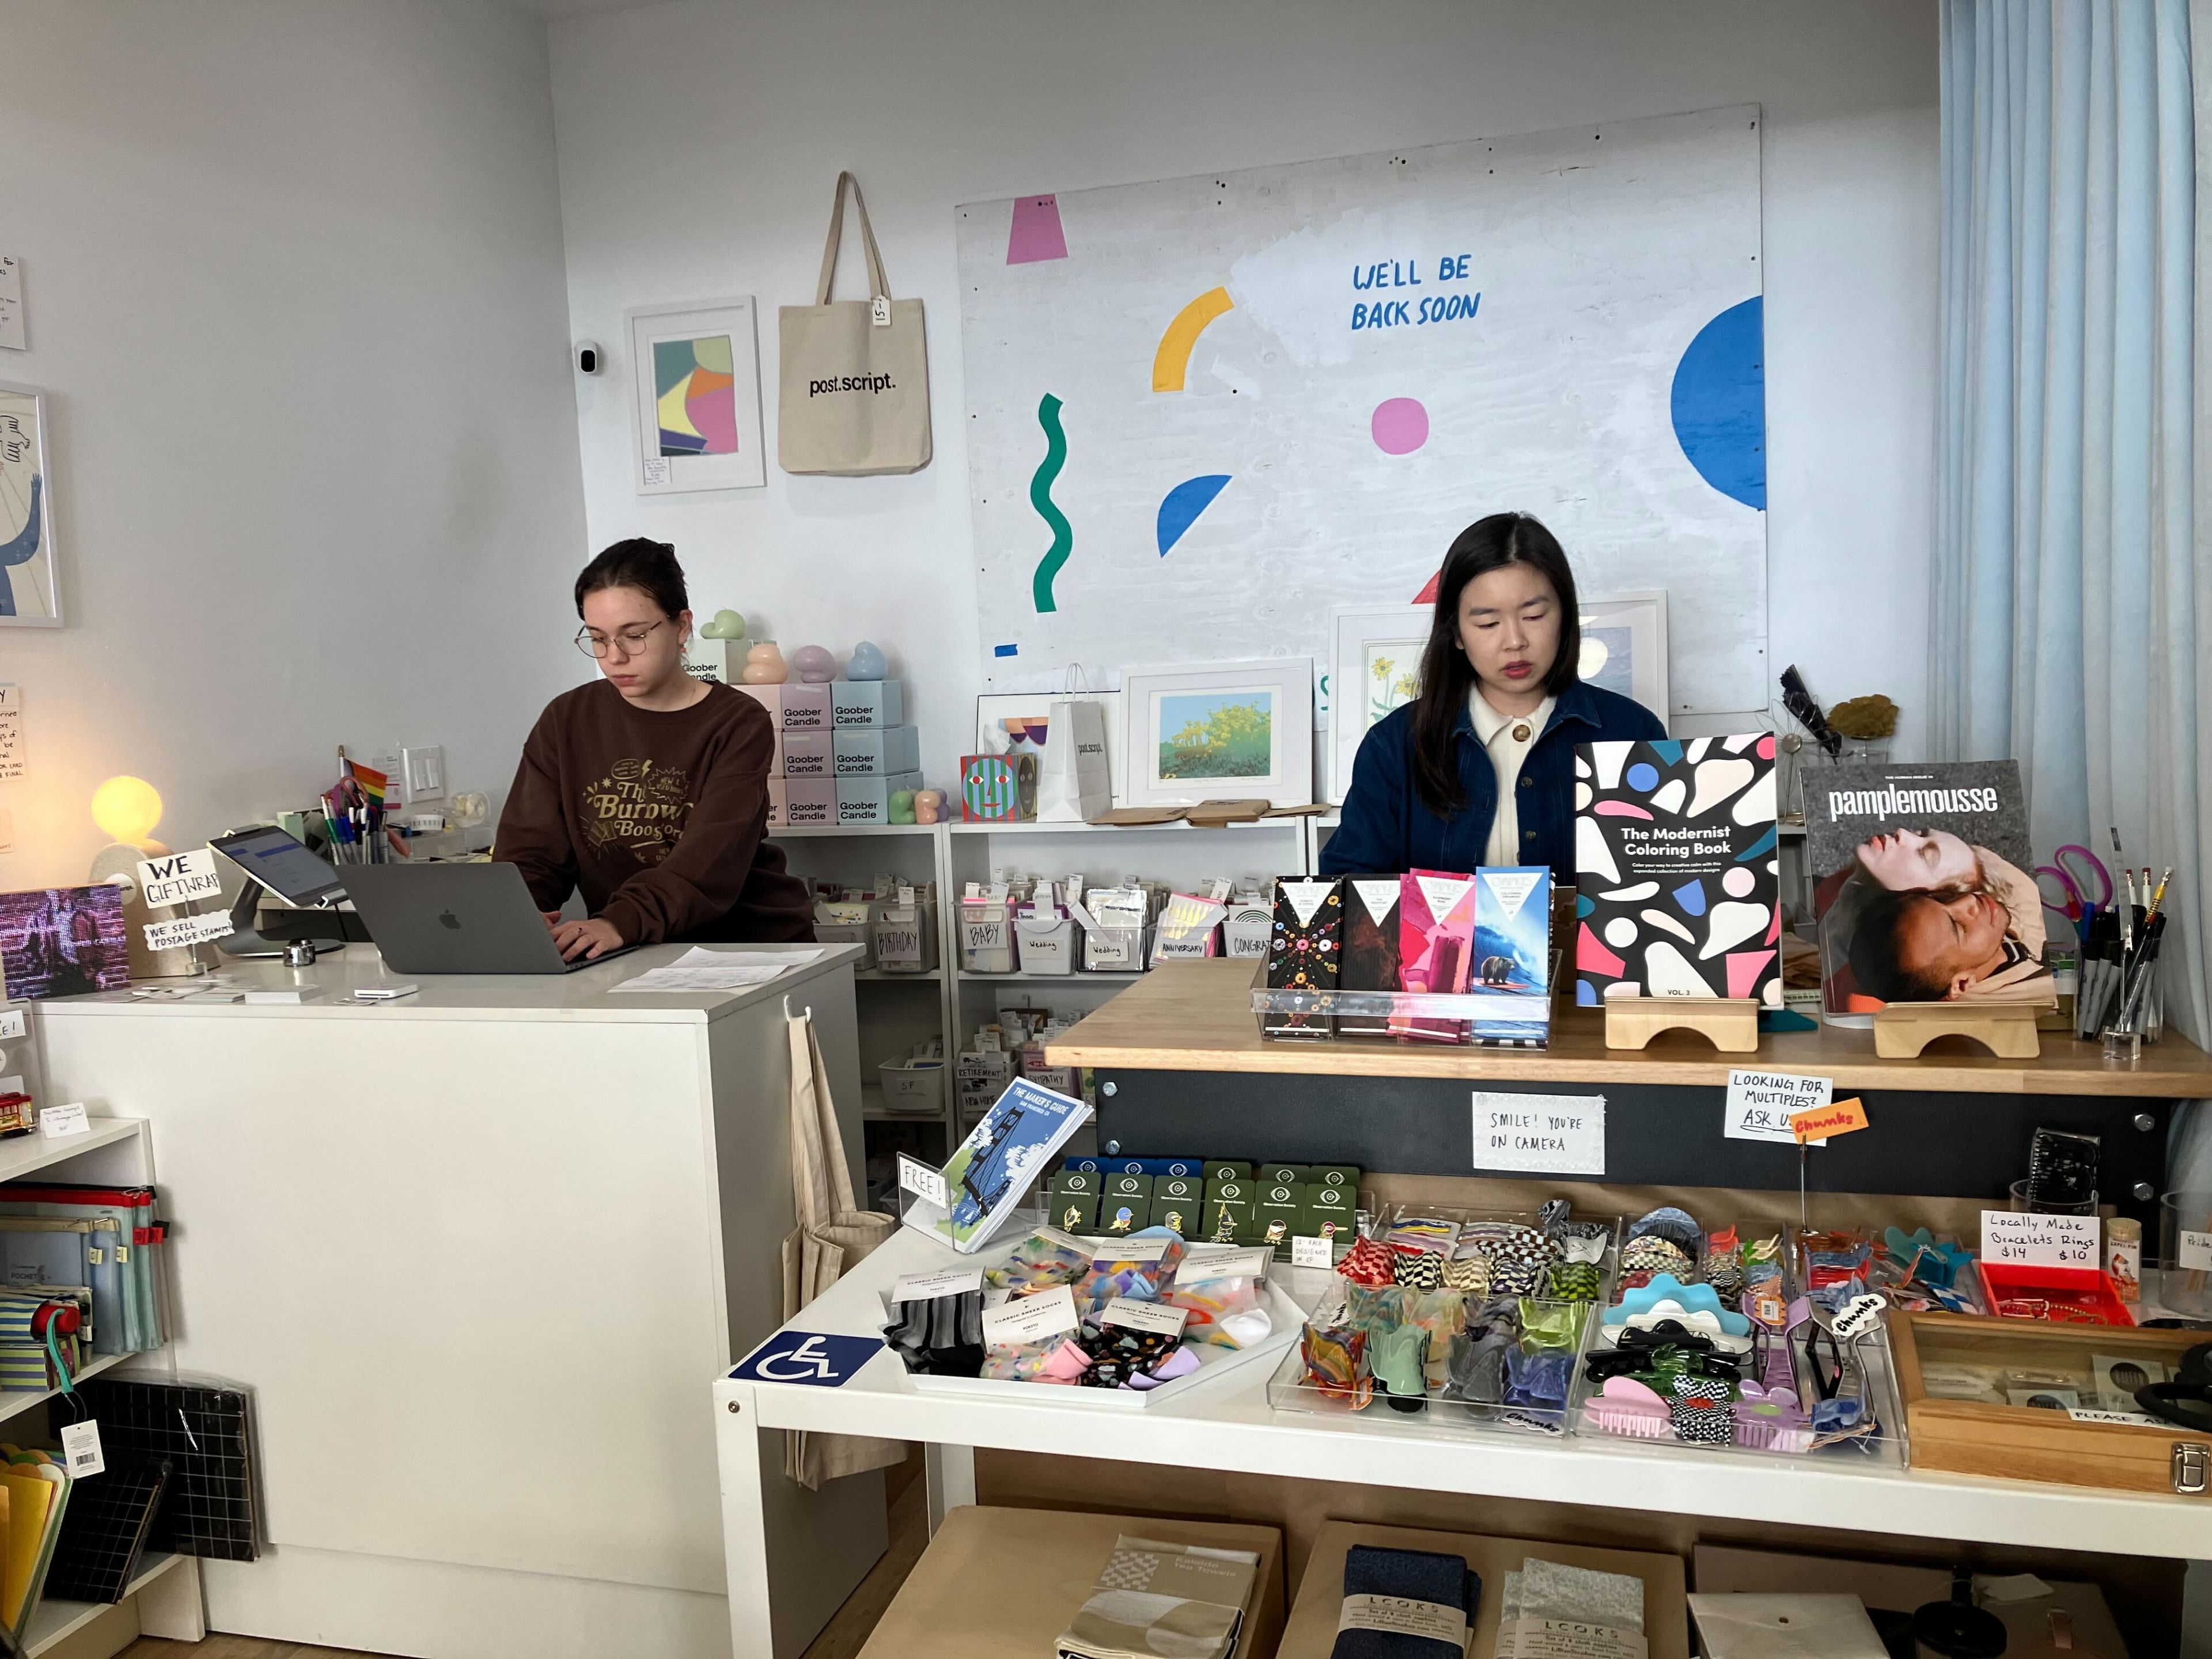 Two people work behind a counter in a bright, art-filled retail shop with various small items on display.